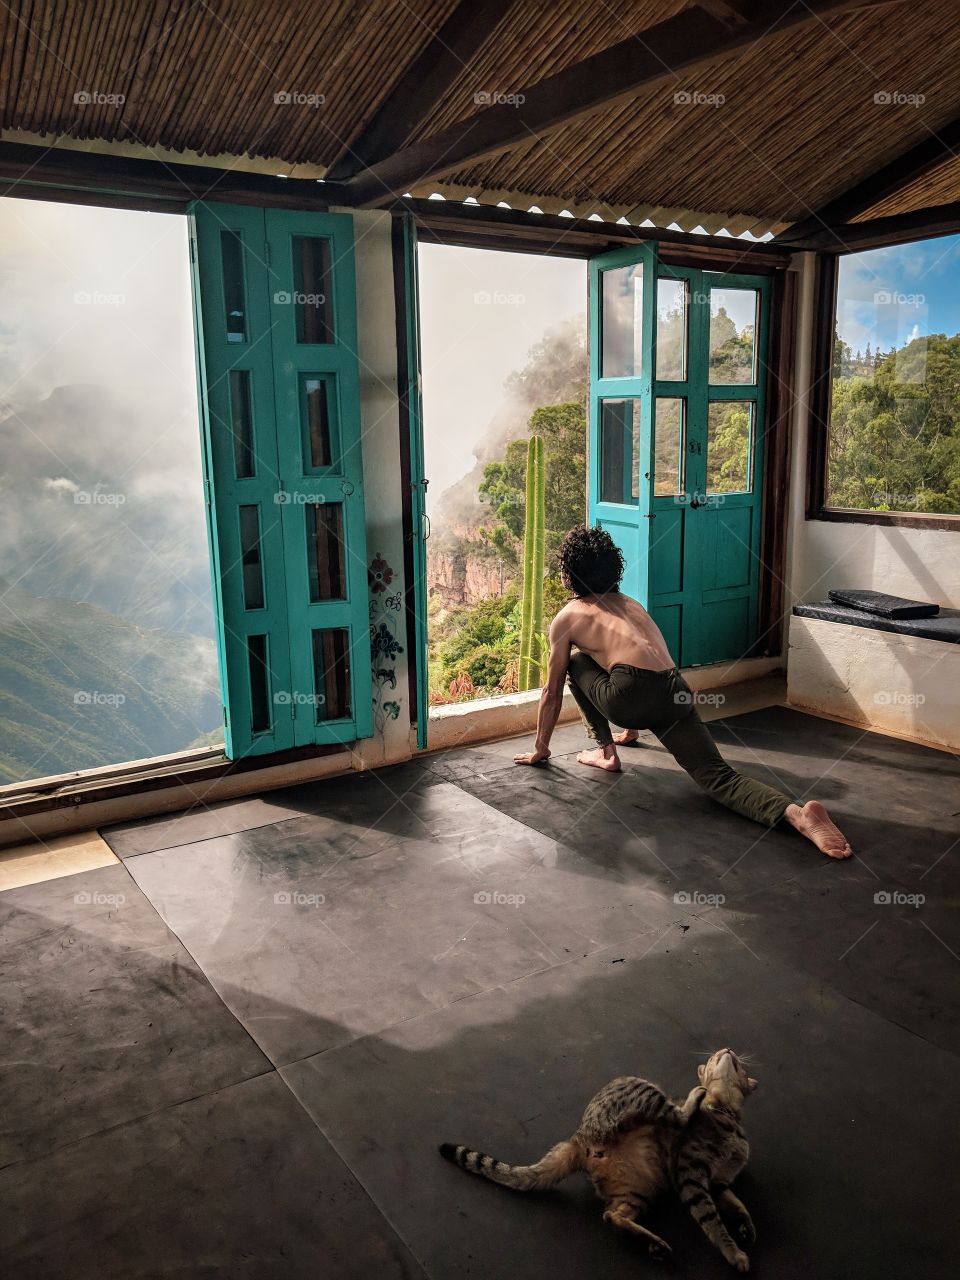 What better way to start the day, than with some morning yoga, in company of this cutie and with this amazing view